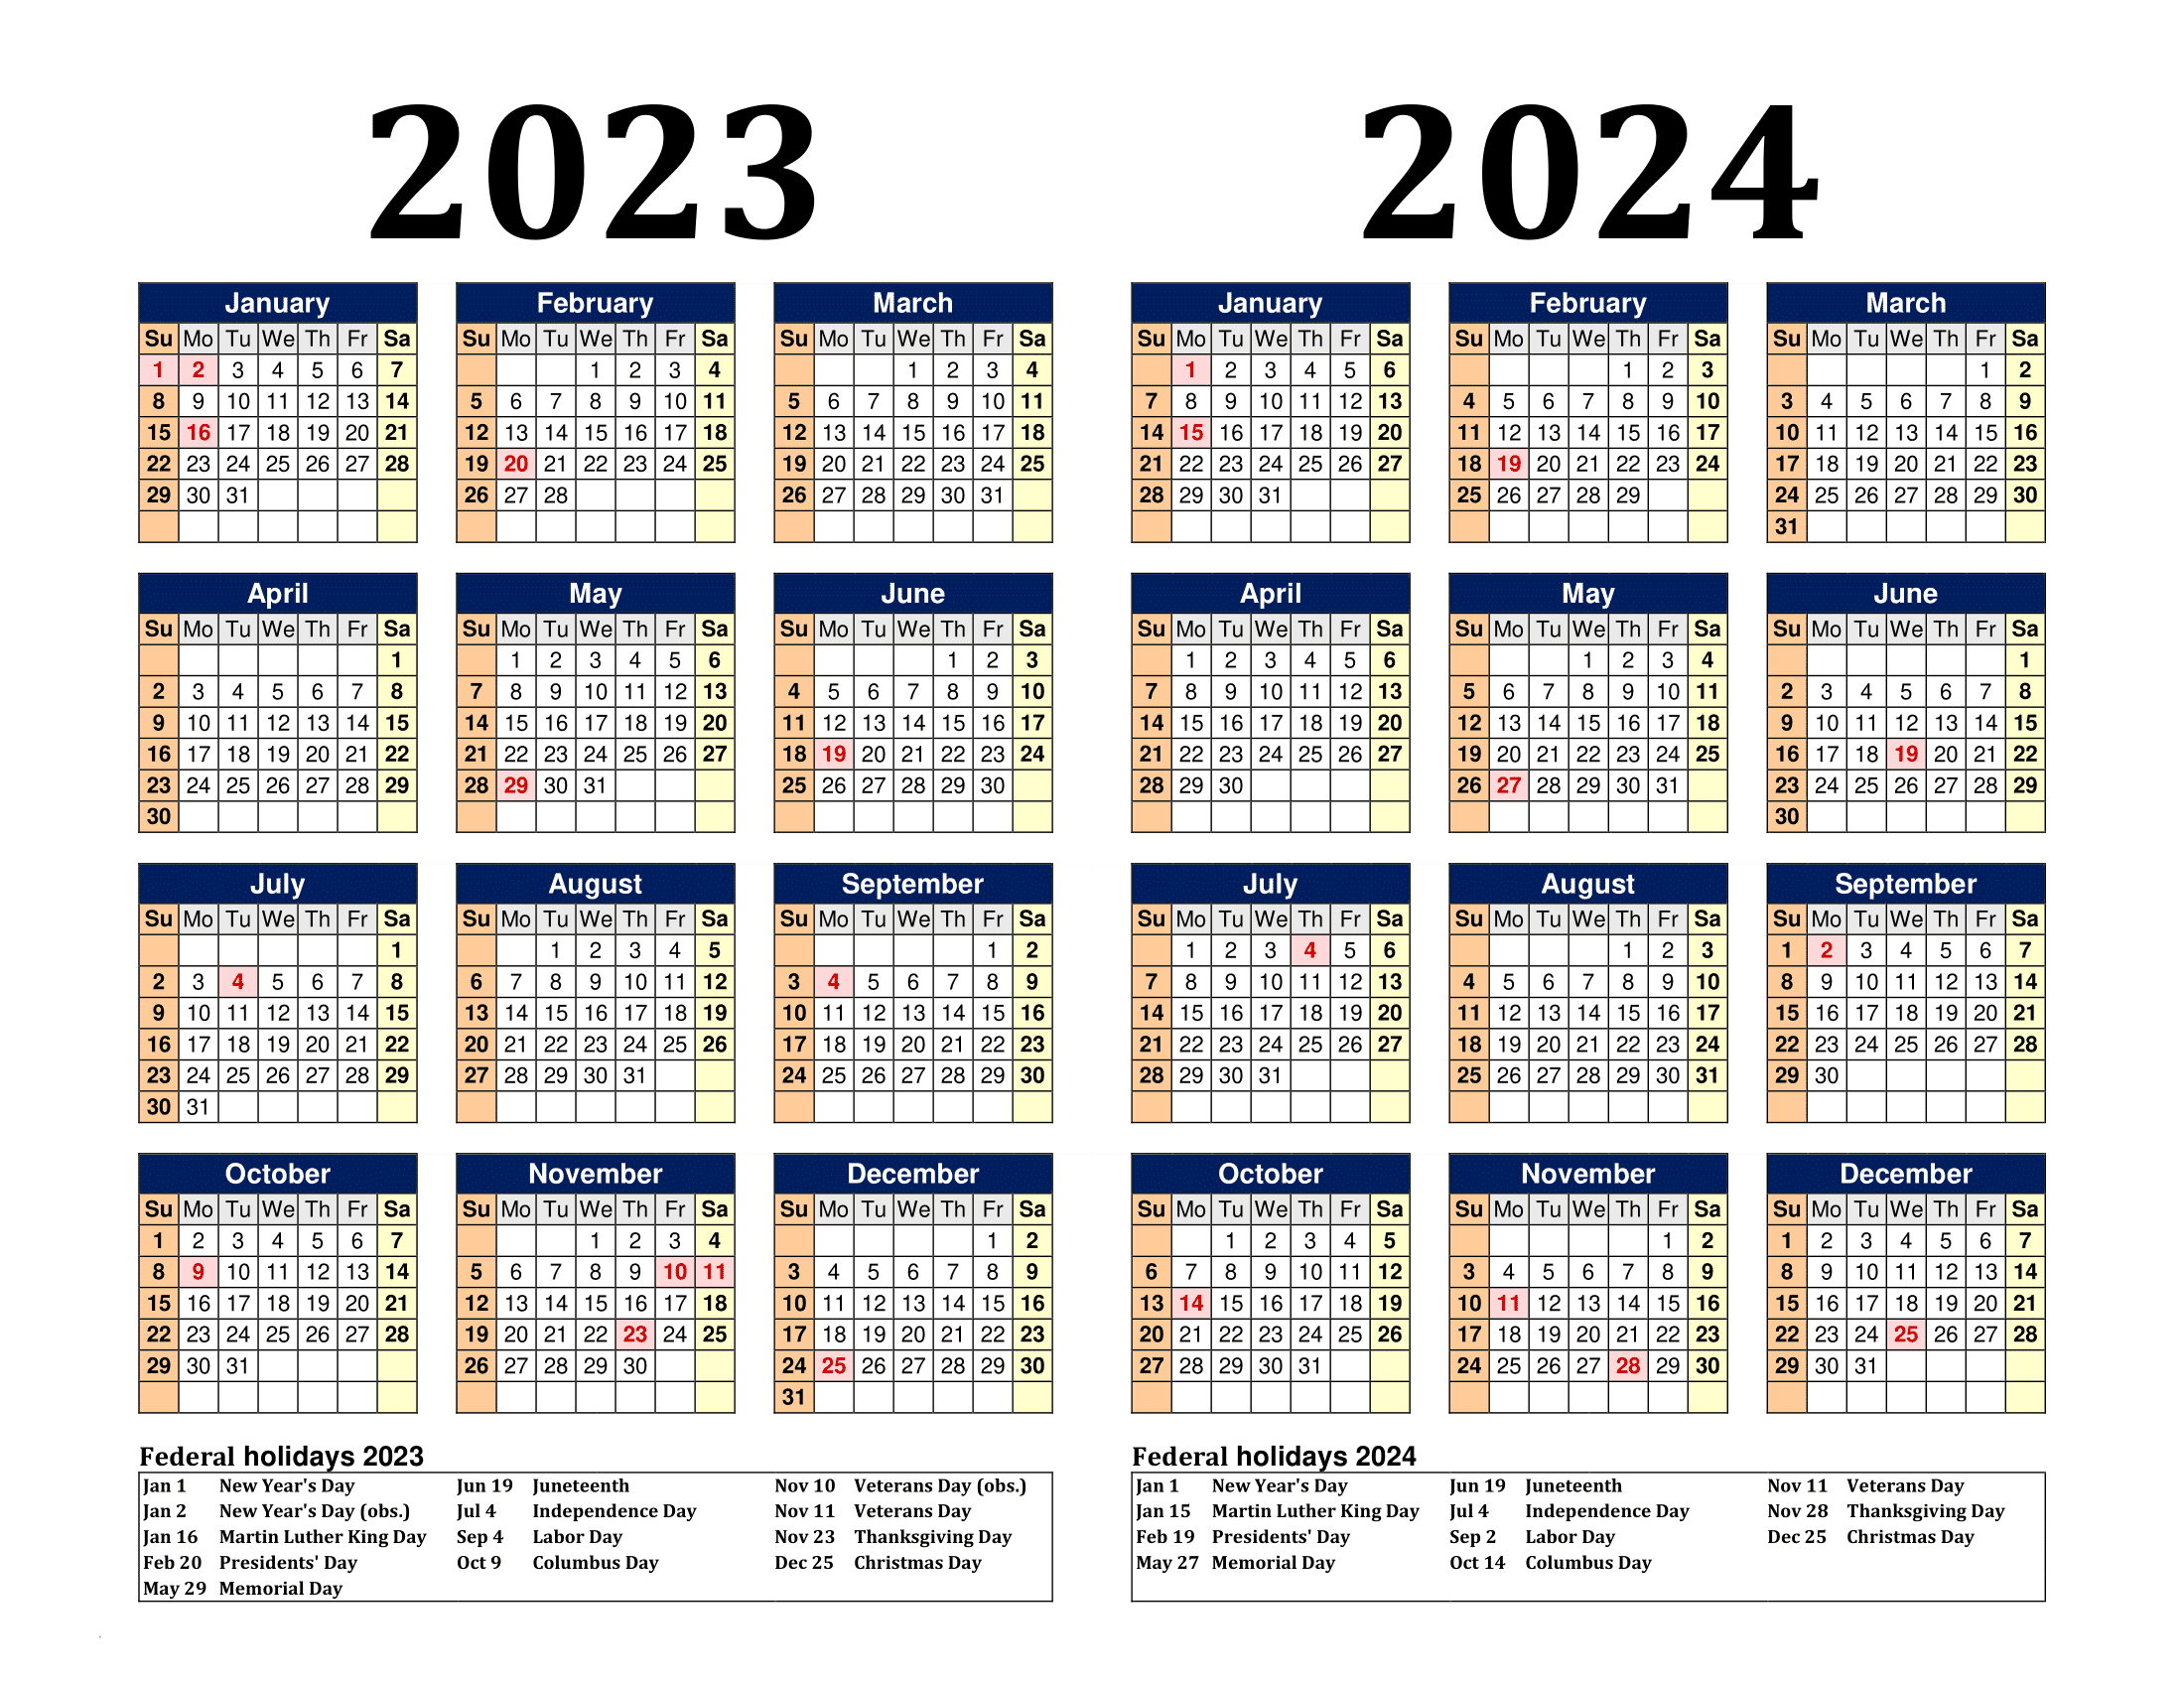 Free Printable Two Year Calendar Templates For 2023 And 2024 In Pdf | Yearly Calendar 2023 2024 Printable